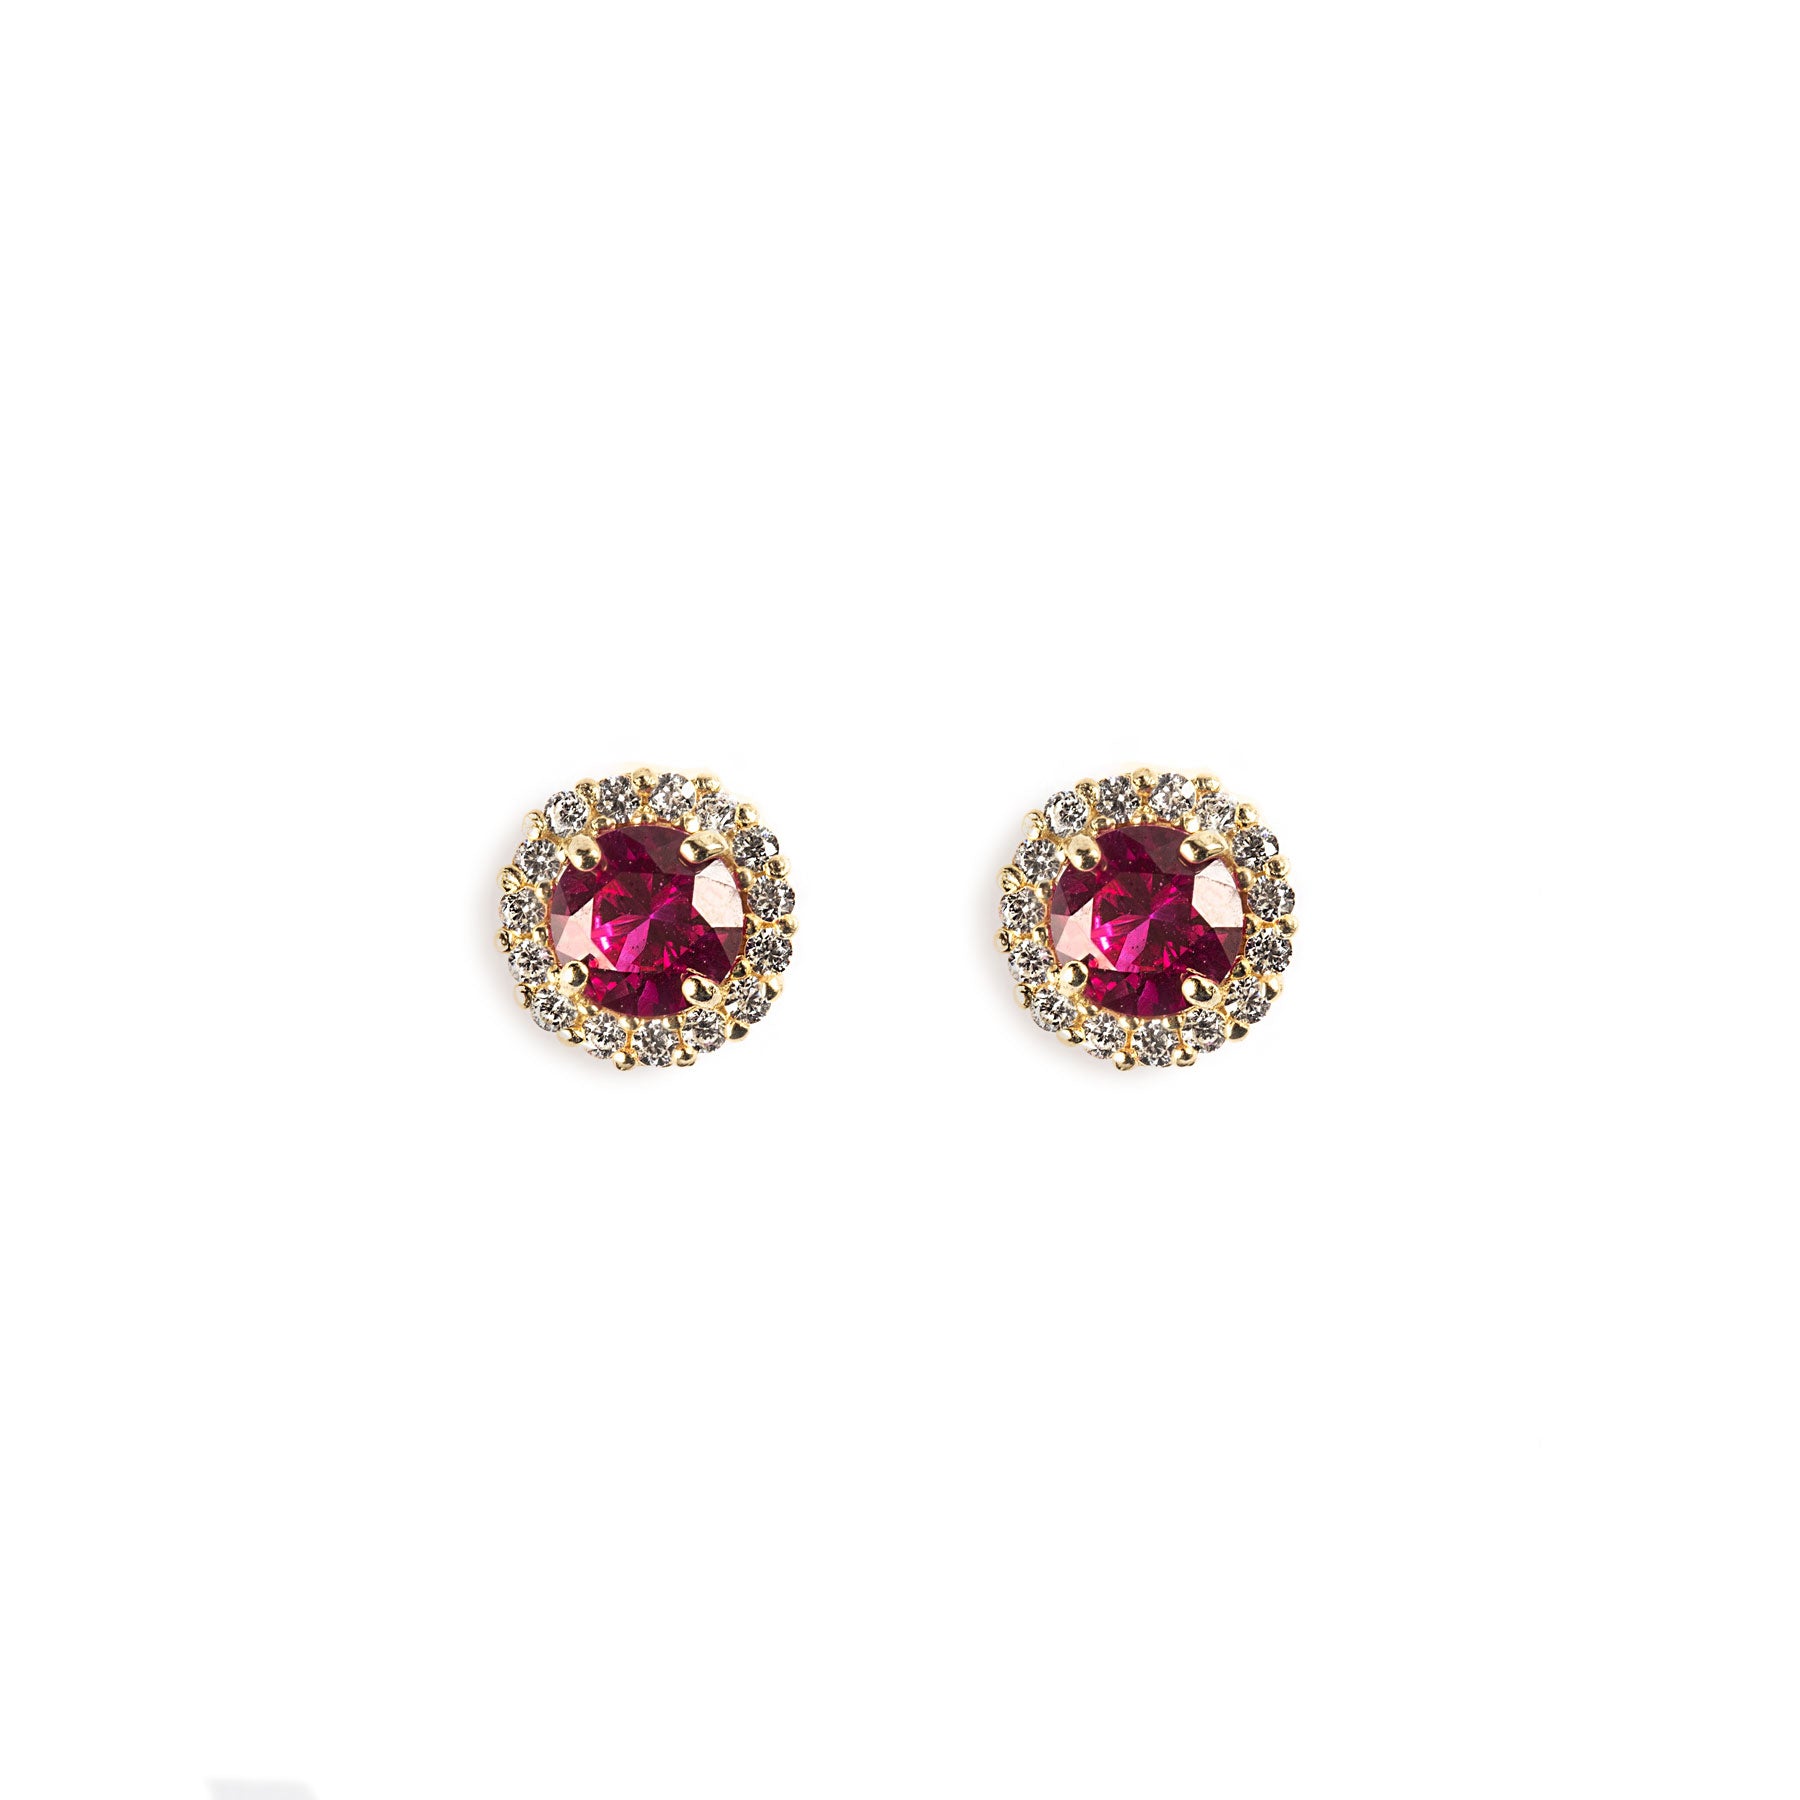 14K GOLD FUCHSIA AND WHITE CRYSTAL BABY EARRINGS